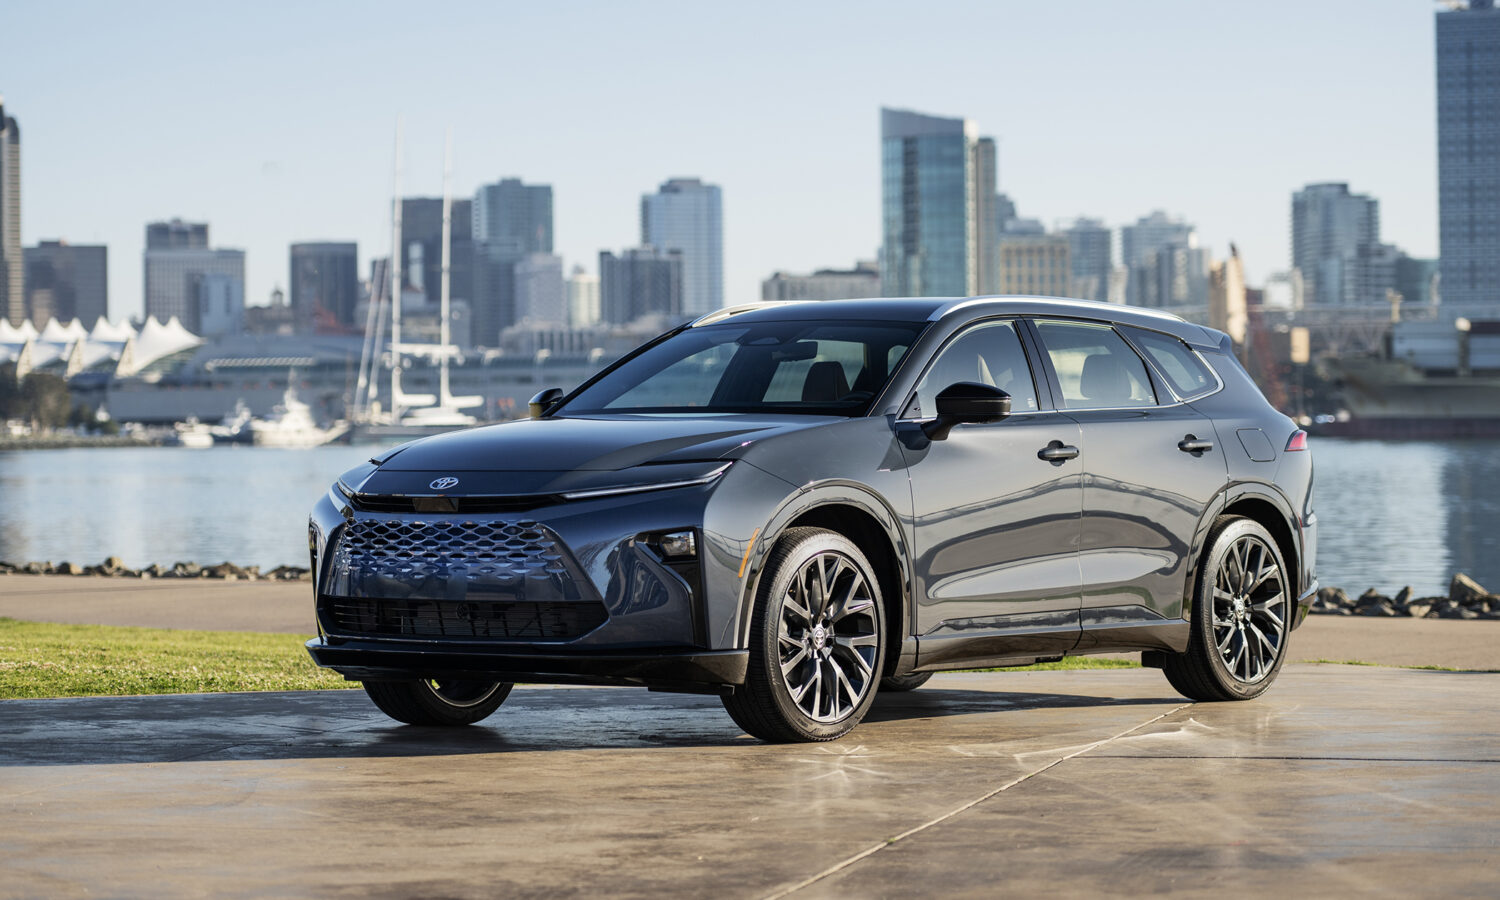 Toyota unveils the 2025 Crown Signia SUV, featuring XLE and Limited grades. With a sleek design, hybrid powertrain delivering 240 hp, and advanced tech, it redefines luxury and performance.